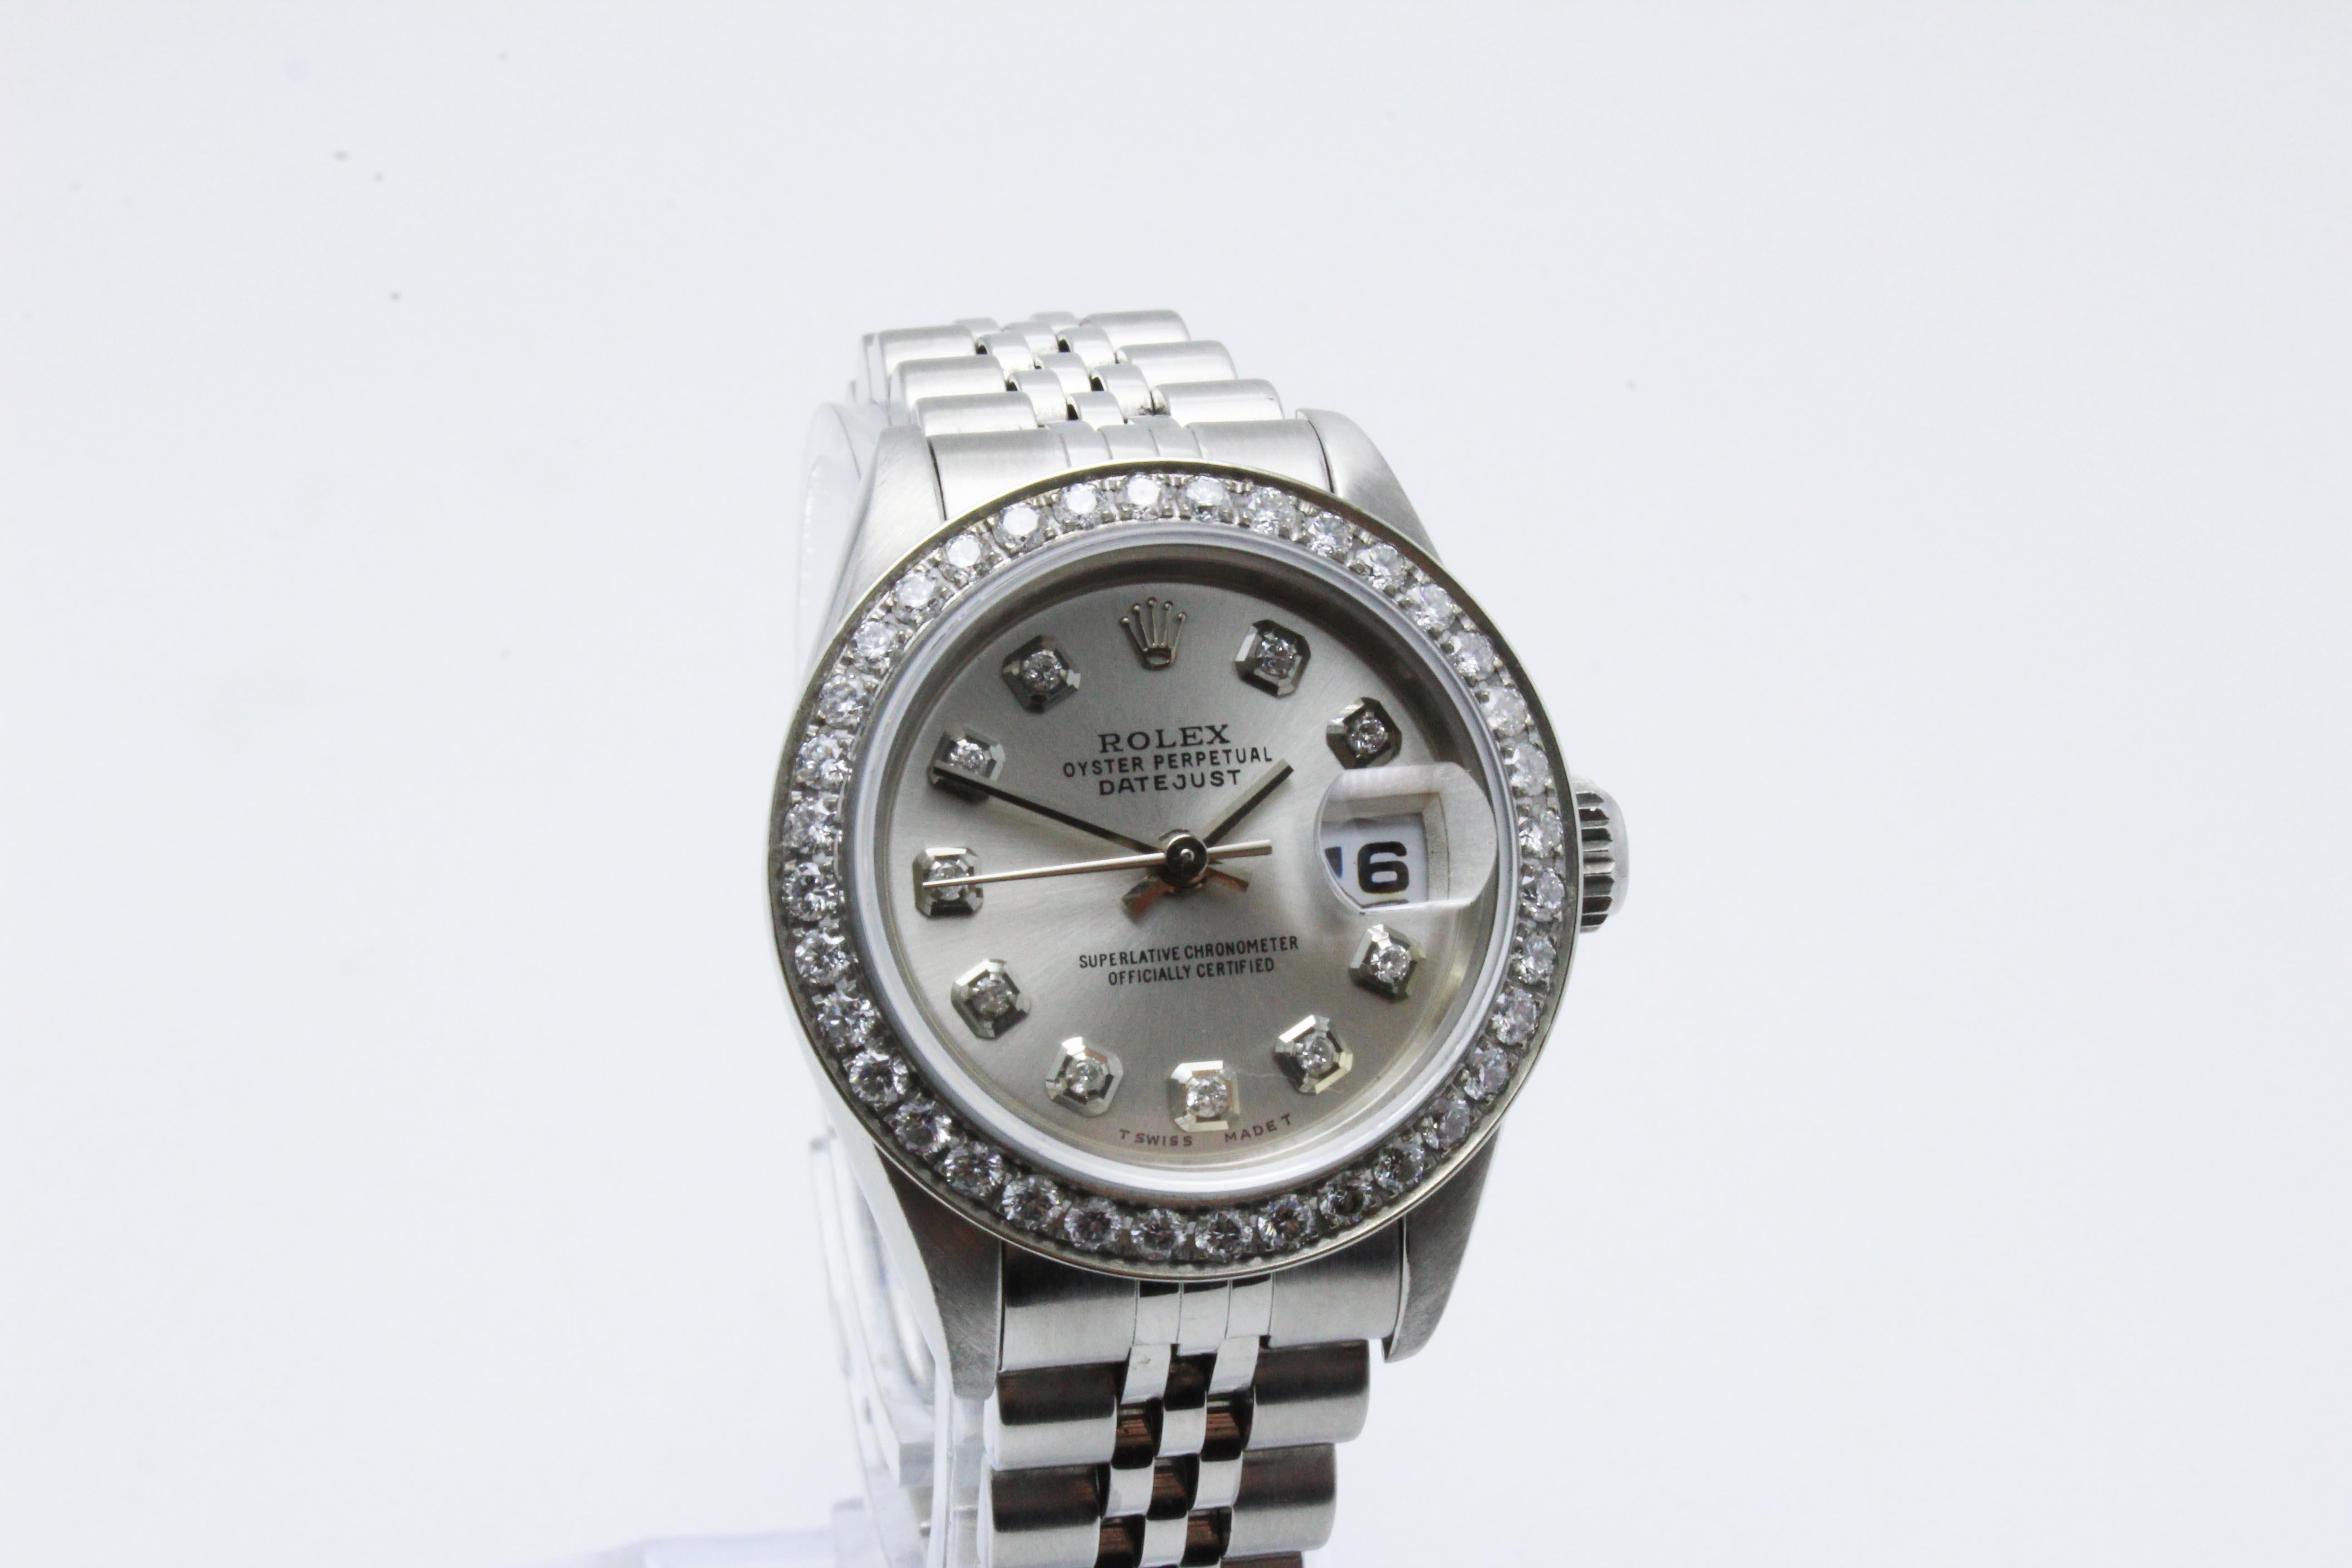 Style Number: 69174

 

Serial: W809***

 

Model: Datejust

 

Case Material: 

 

Band: Stainless Steel

 

Bezel:  Custom Diamond Bezel

 

Dial: Custom Diamond Dial

 

Face: Sapphire Crystal 

 

Case Size: 26mm

 

Includes: 

-Elegant Watch